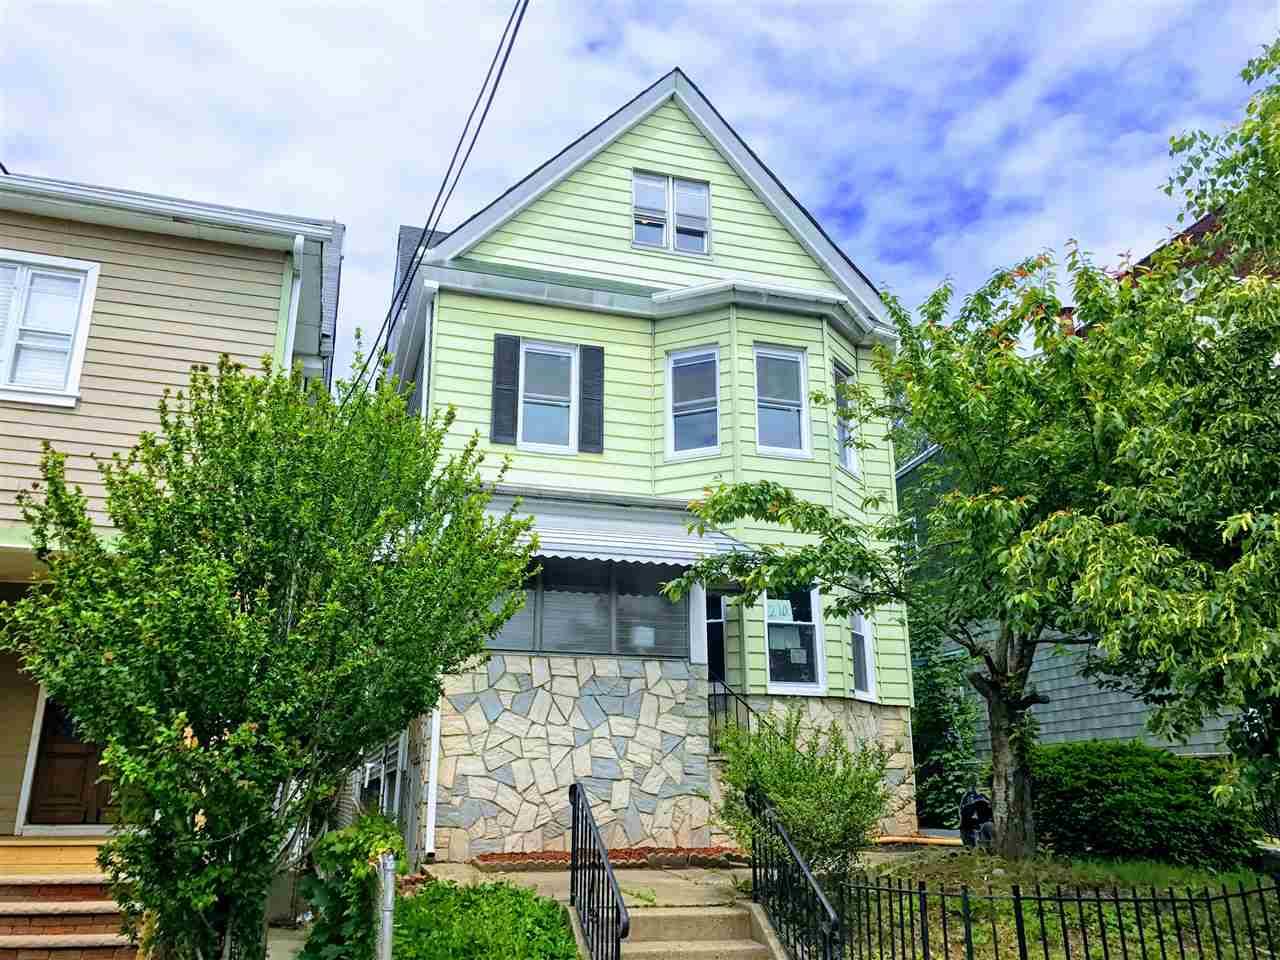 Tastefully renovated early 20th century 5 bedroom Victorian located in the West Bergen-East Lincoln Park Historic District of Jersey City